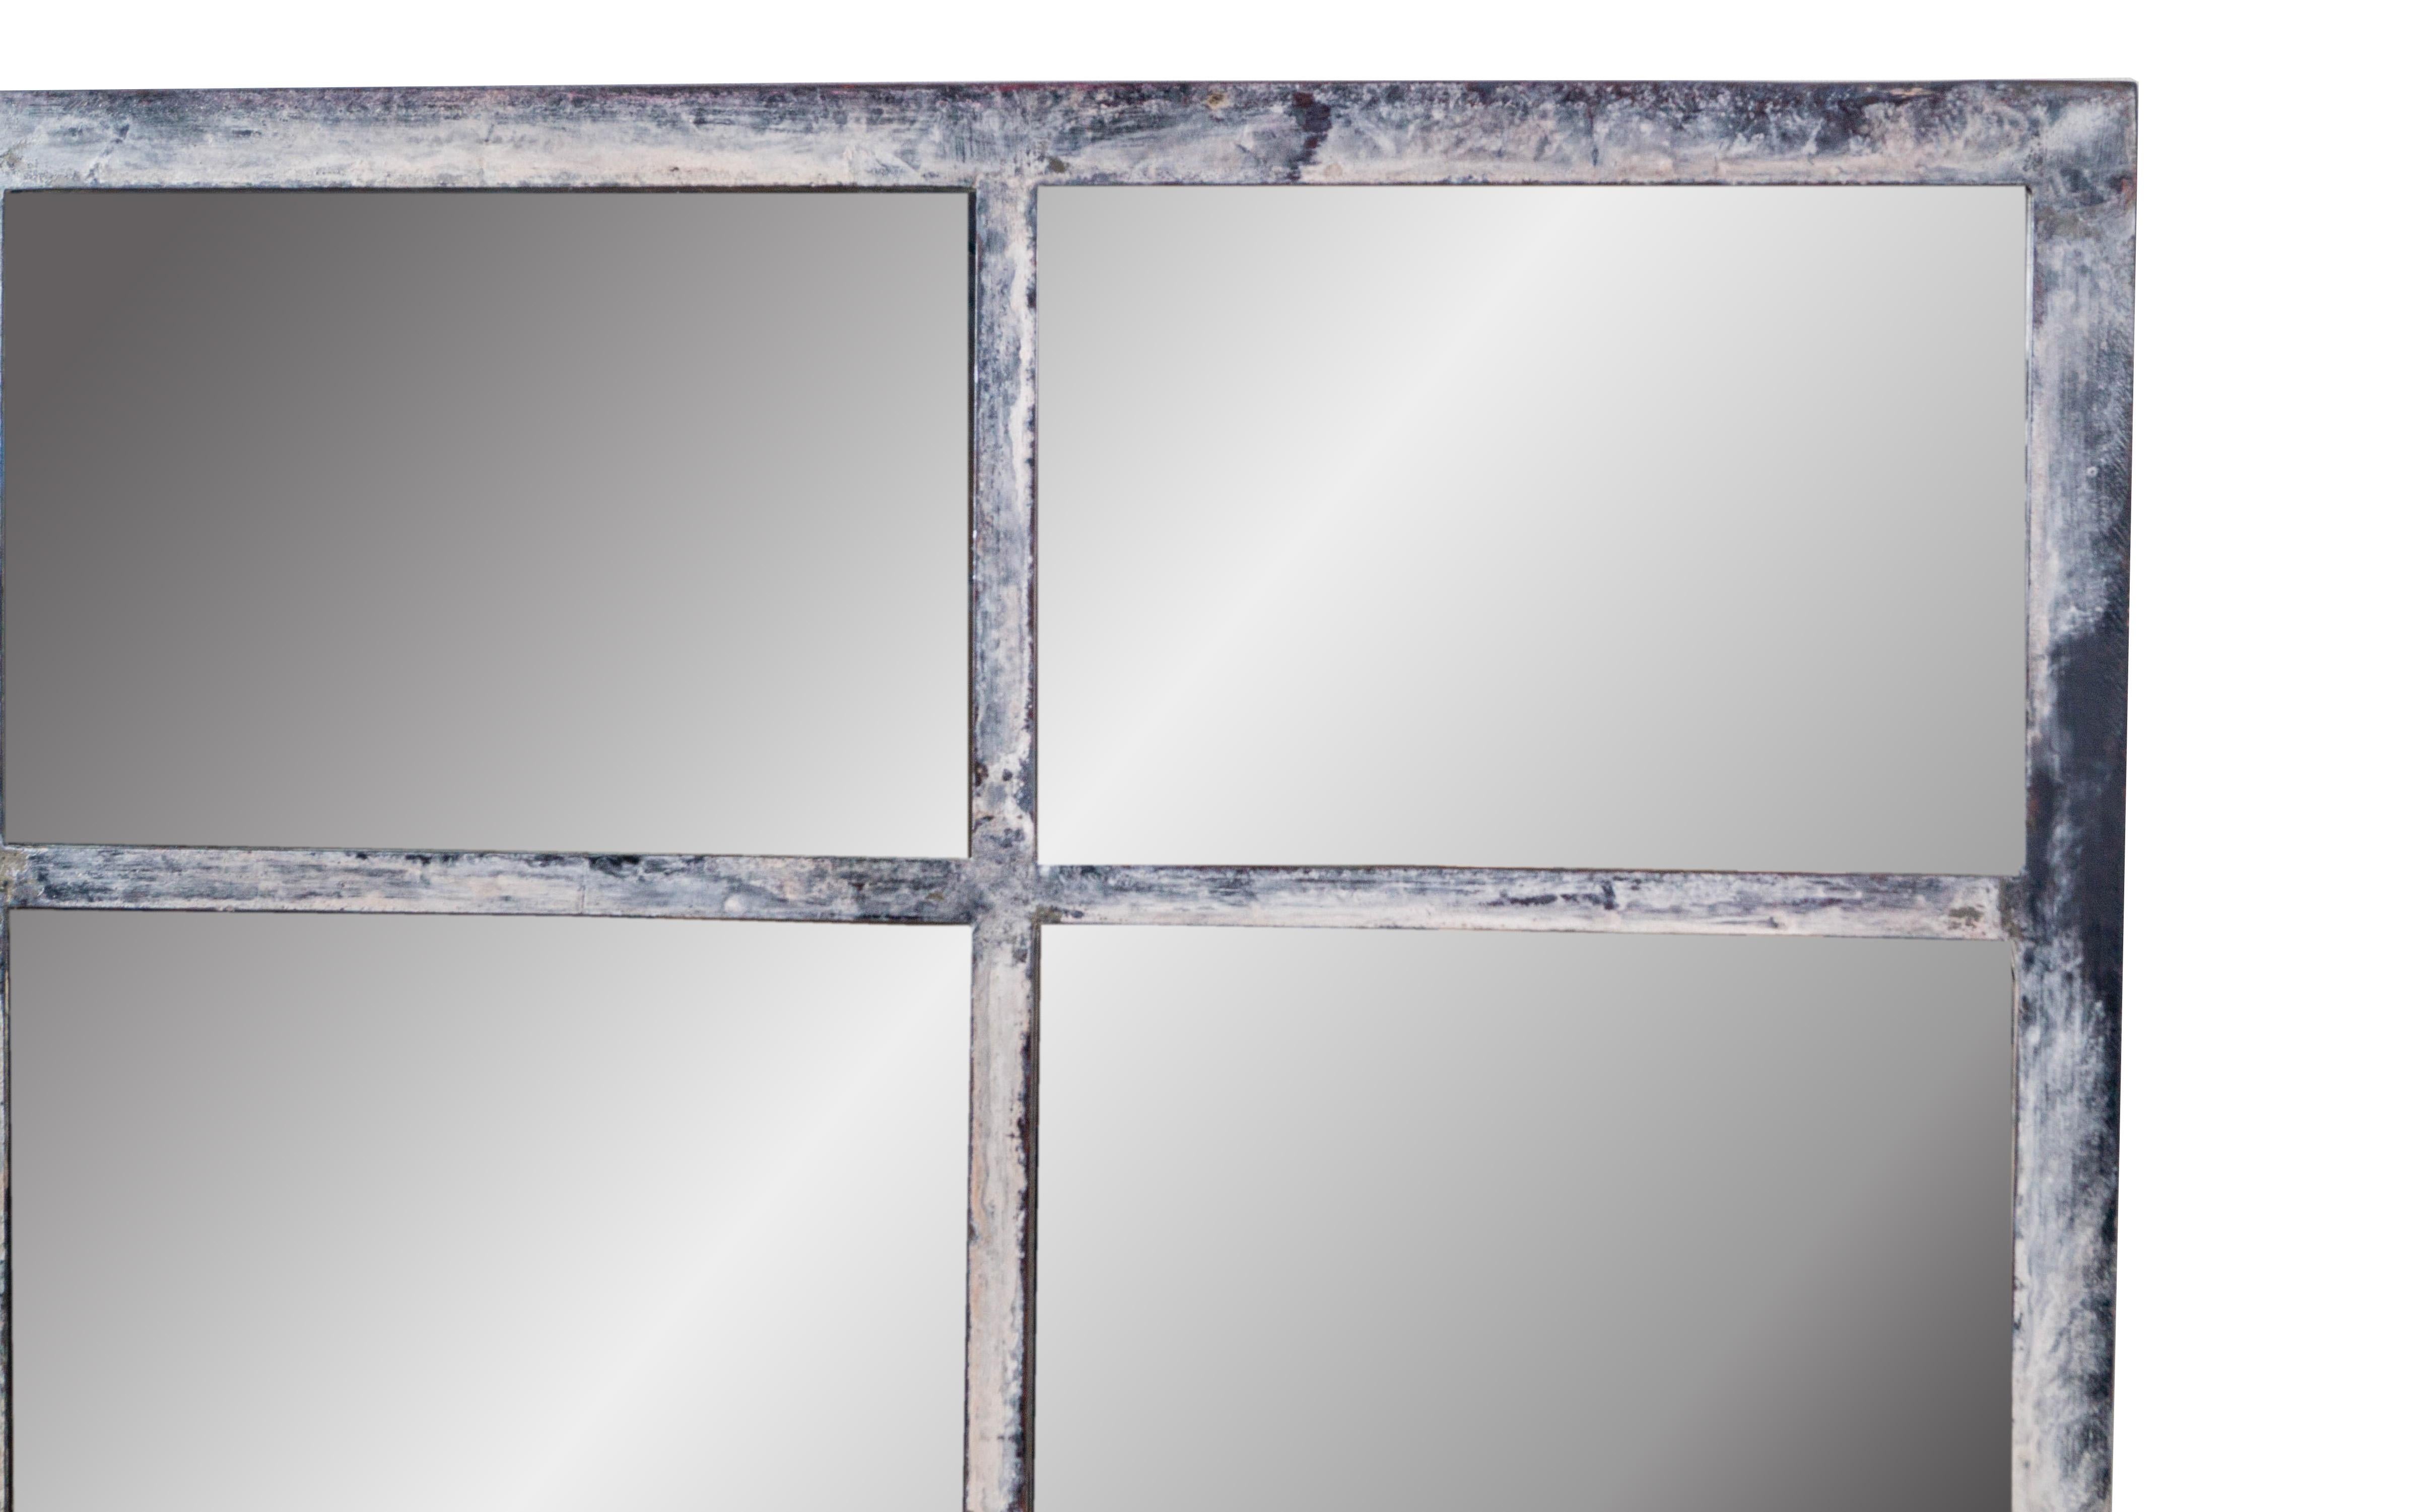 In a century of changing styles, this vintage French window framed mirror is still one of the most popular and versatile pieces of furniture in any room. The Rustic Art Mirror is handcrafted with a rich, distressed-look, patina on antique French